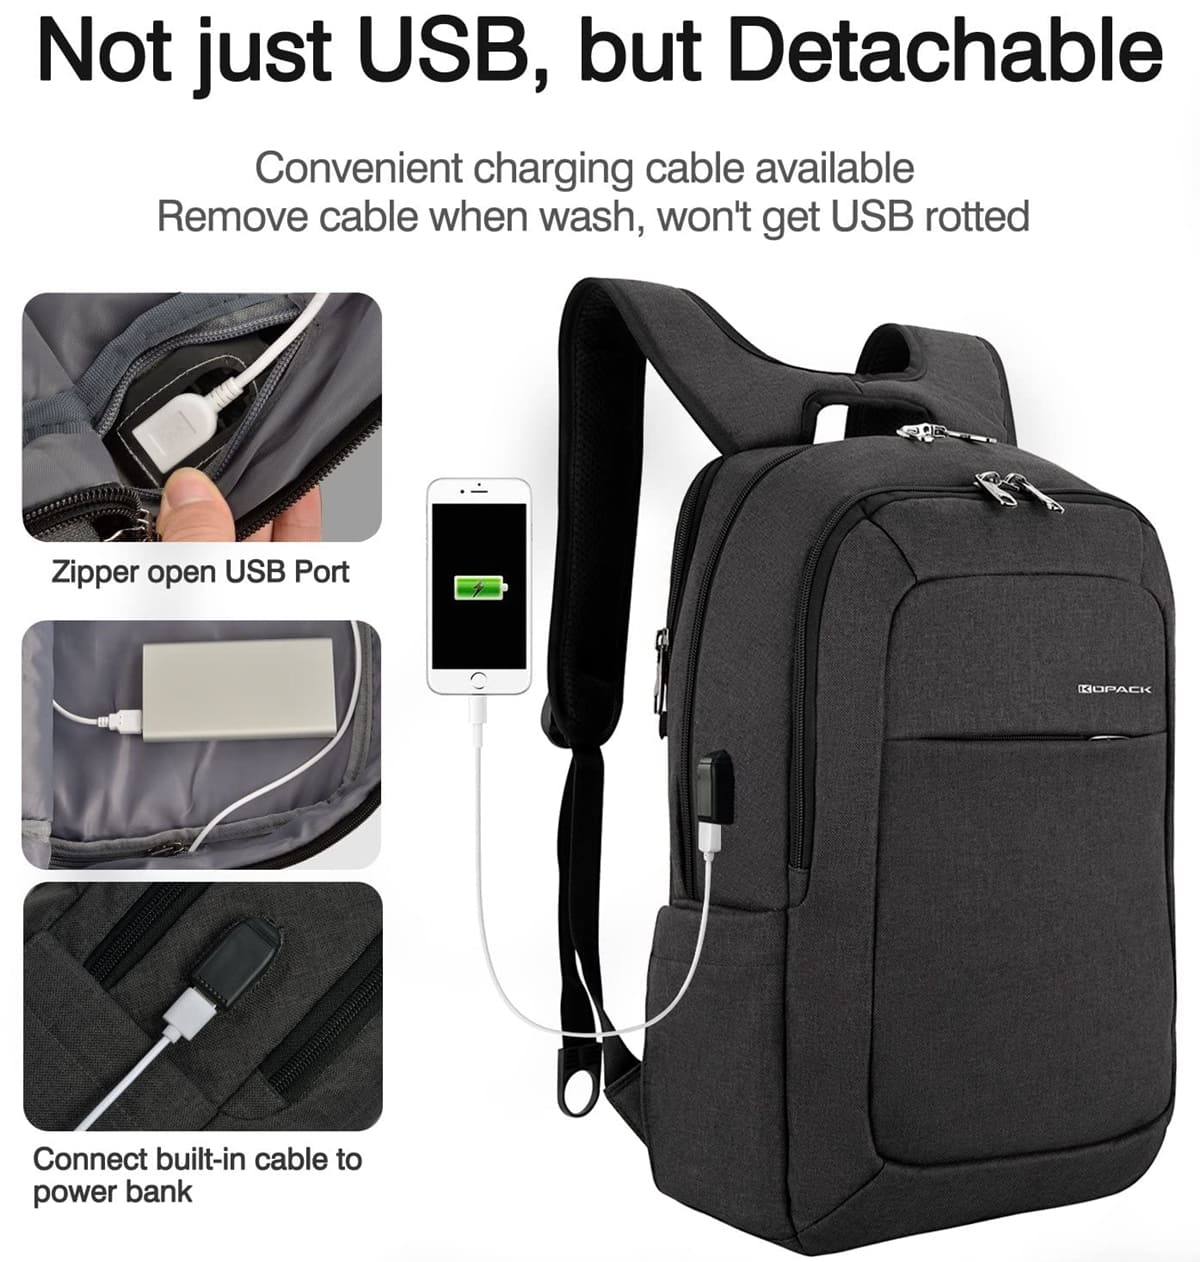 This backpack has an external USB port so that you can easily charge your phone up while on the move